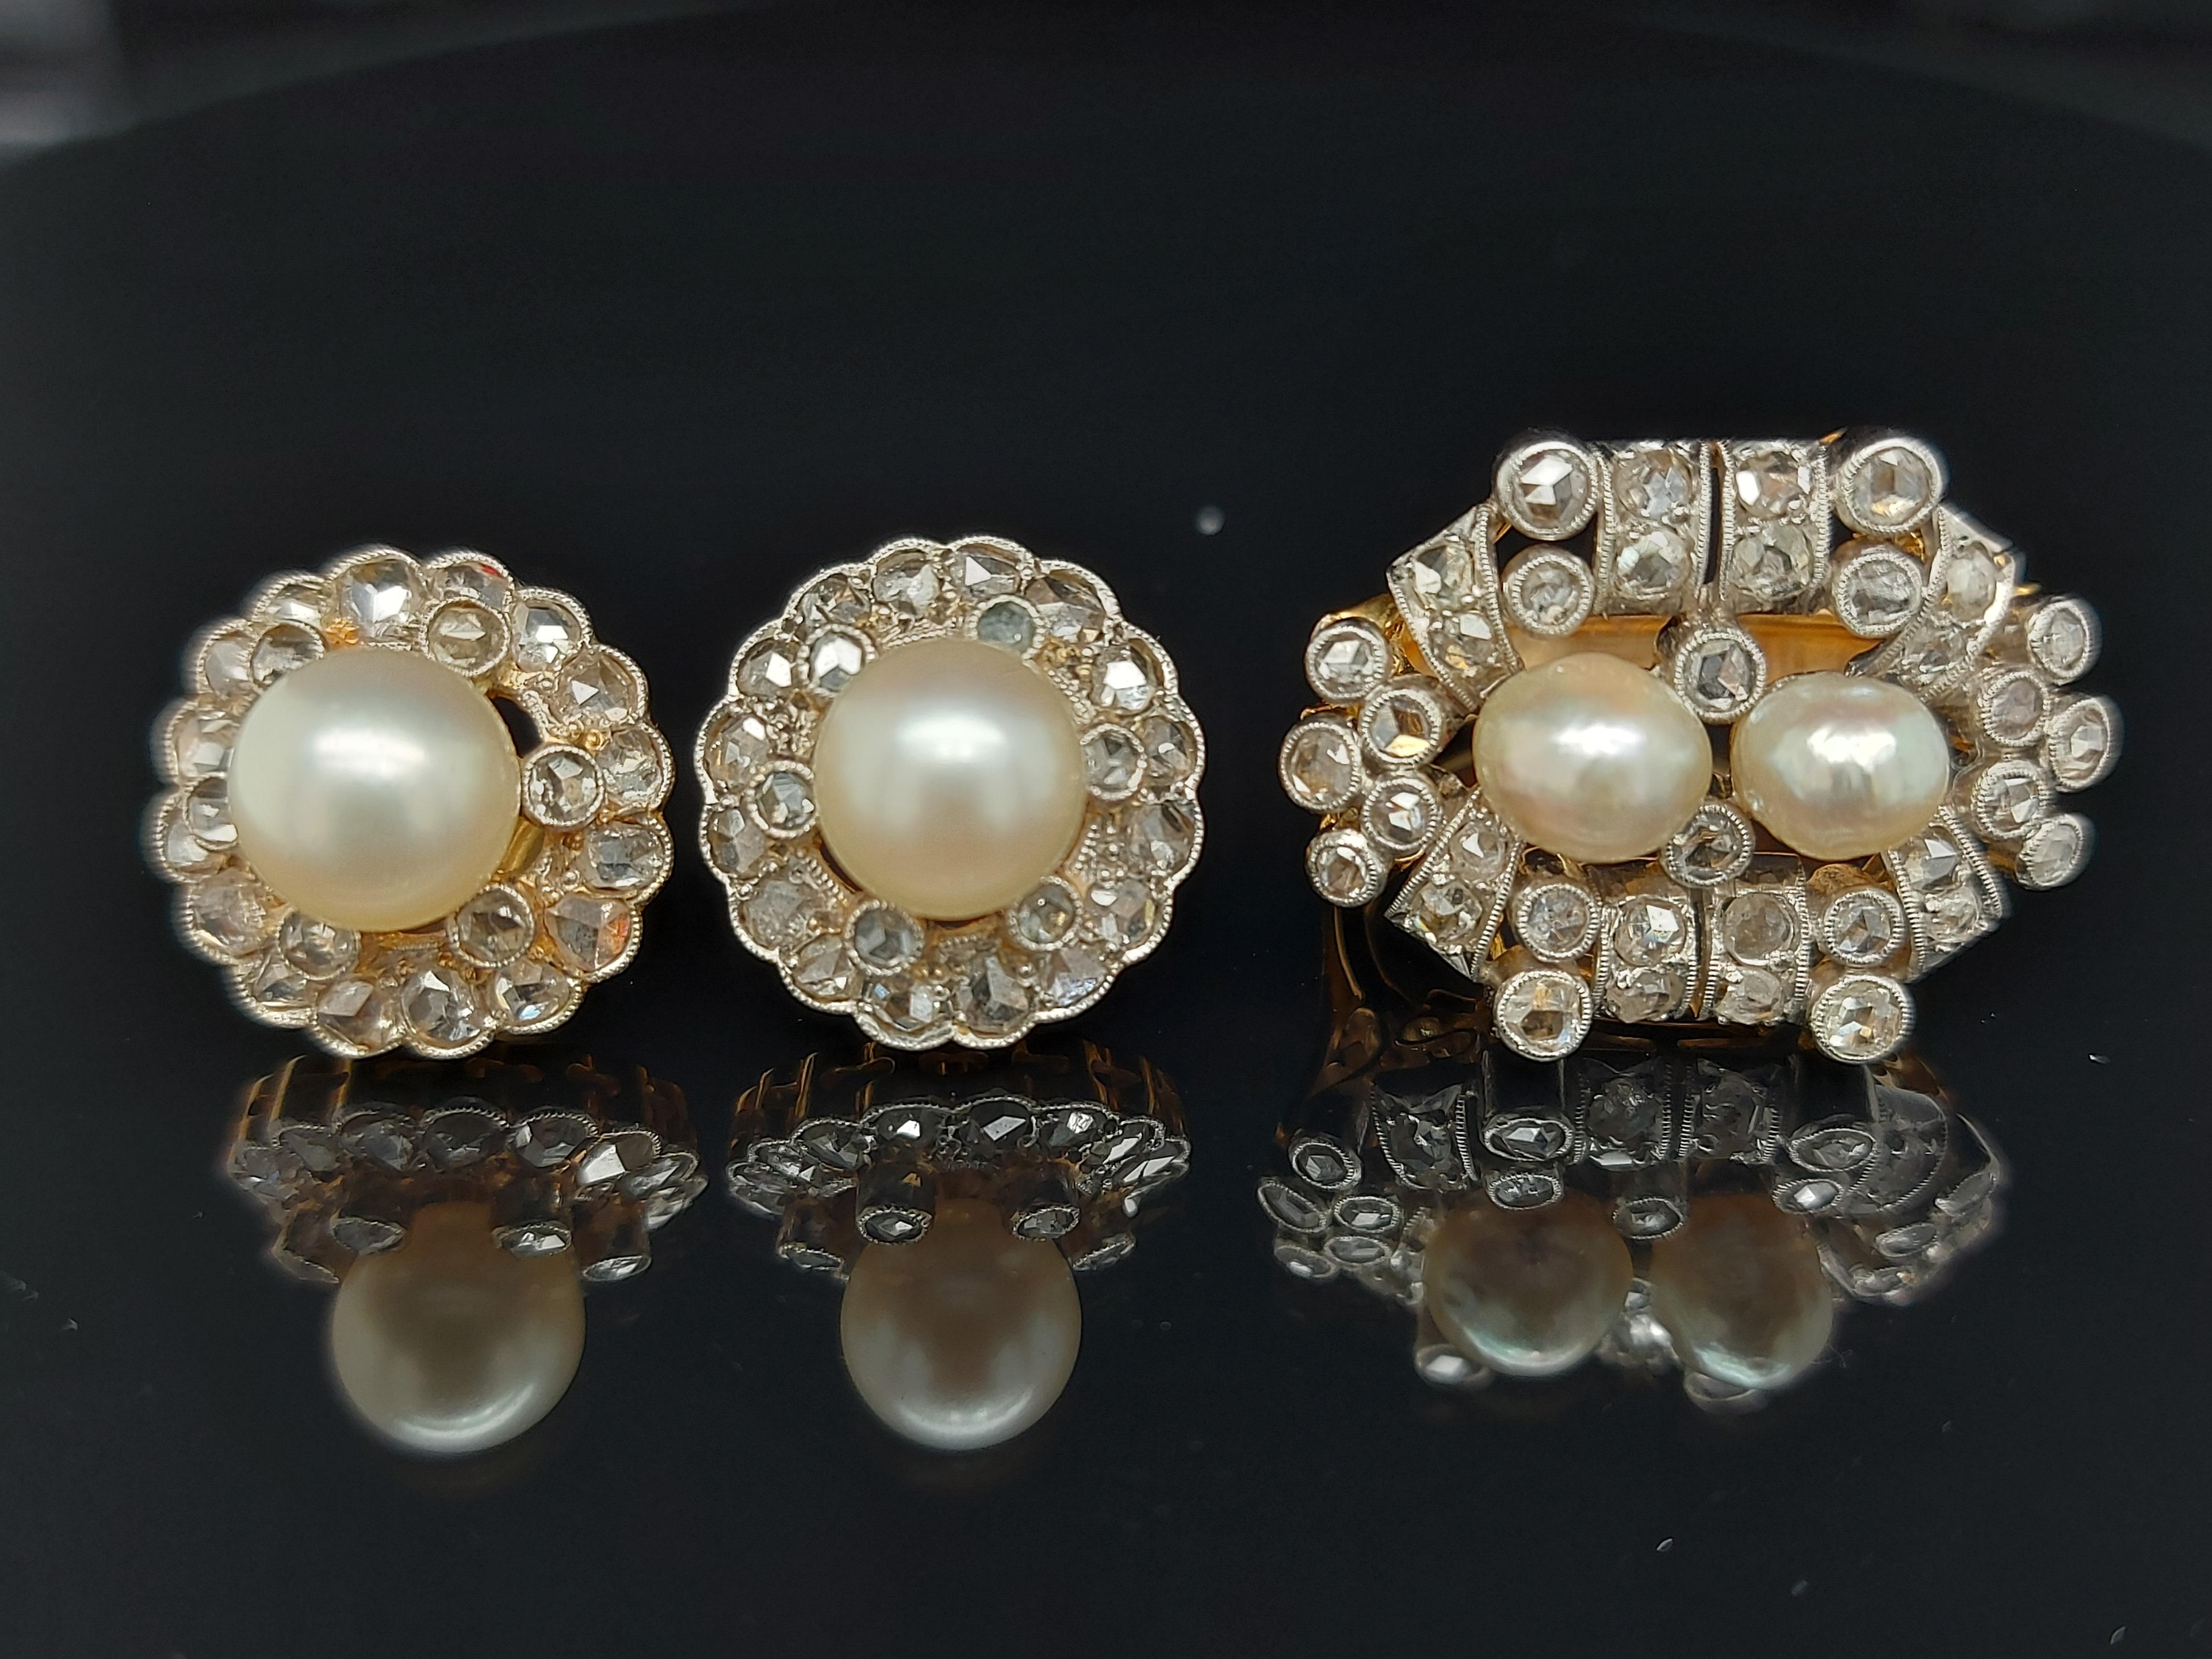 Beautiful Vintage Platinum & 18 kt Ring & Earrings with Rose cut Diamonds & Natural Pearls

Diamonds: 32 rose cut diamonds

Pearls: 2 with a diameter of approx 6.4 mm 

Material: Platinum and yellow gold

Ring size: 51 ( can be adjusted for